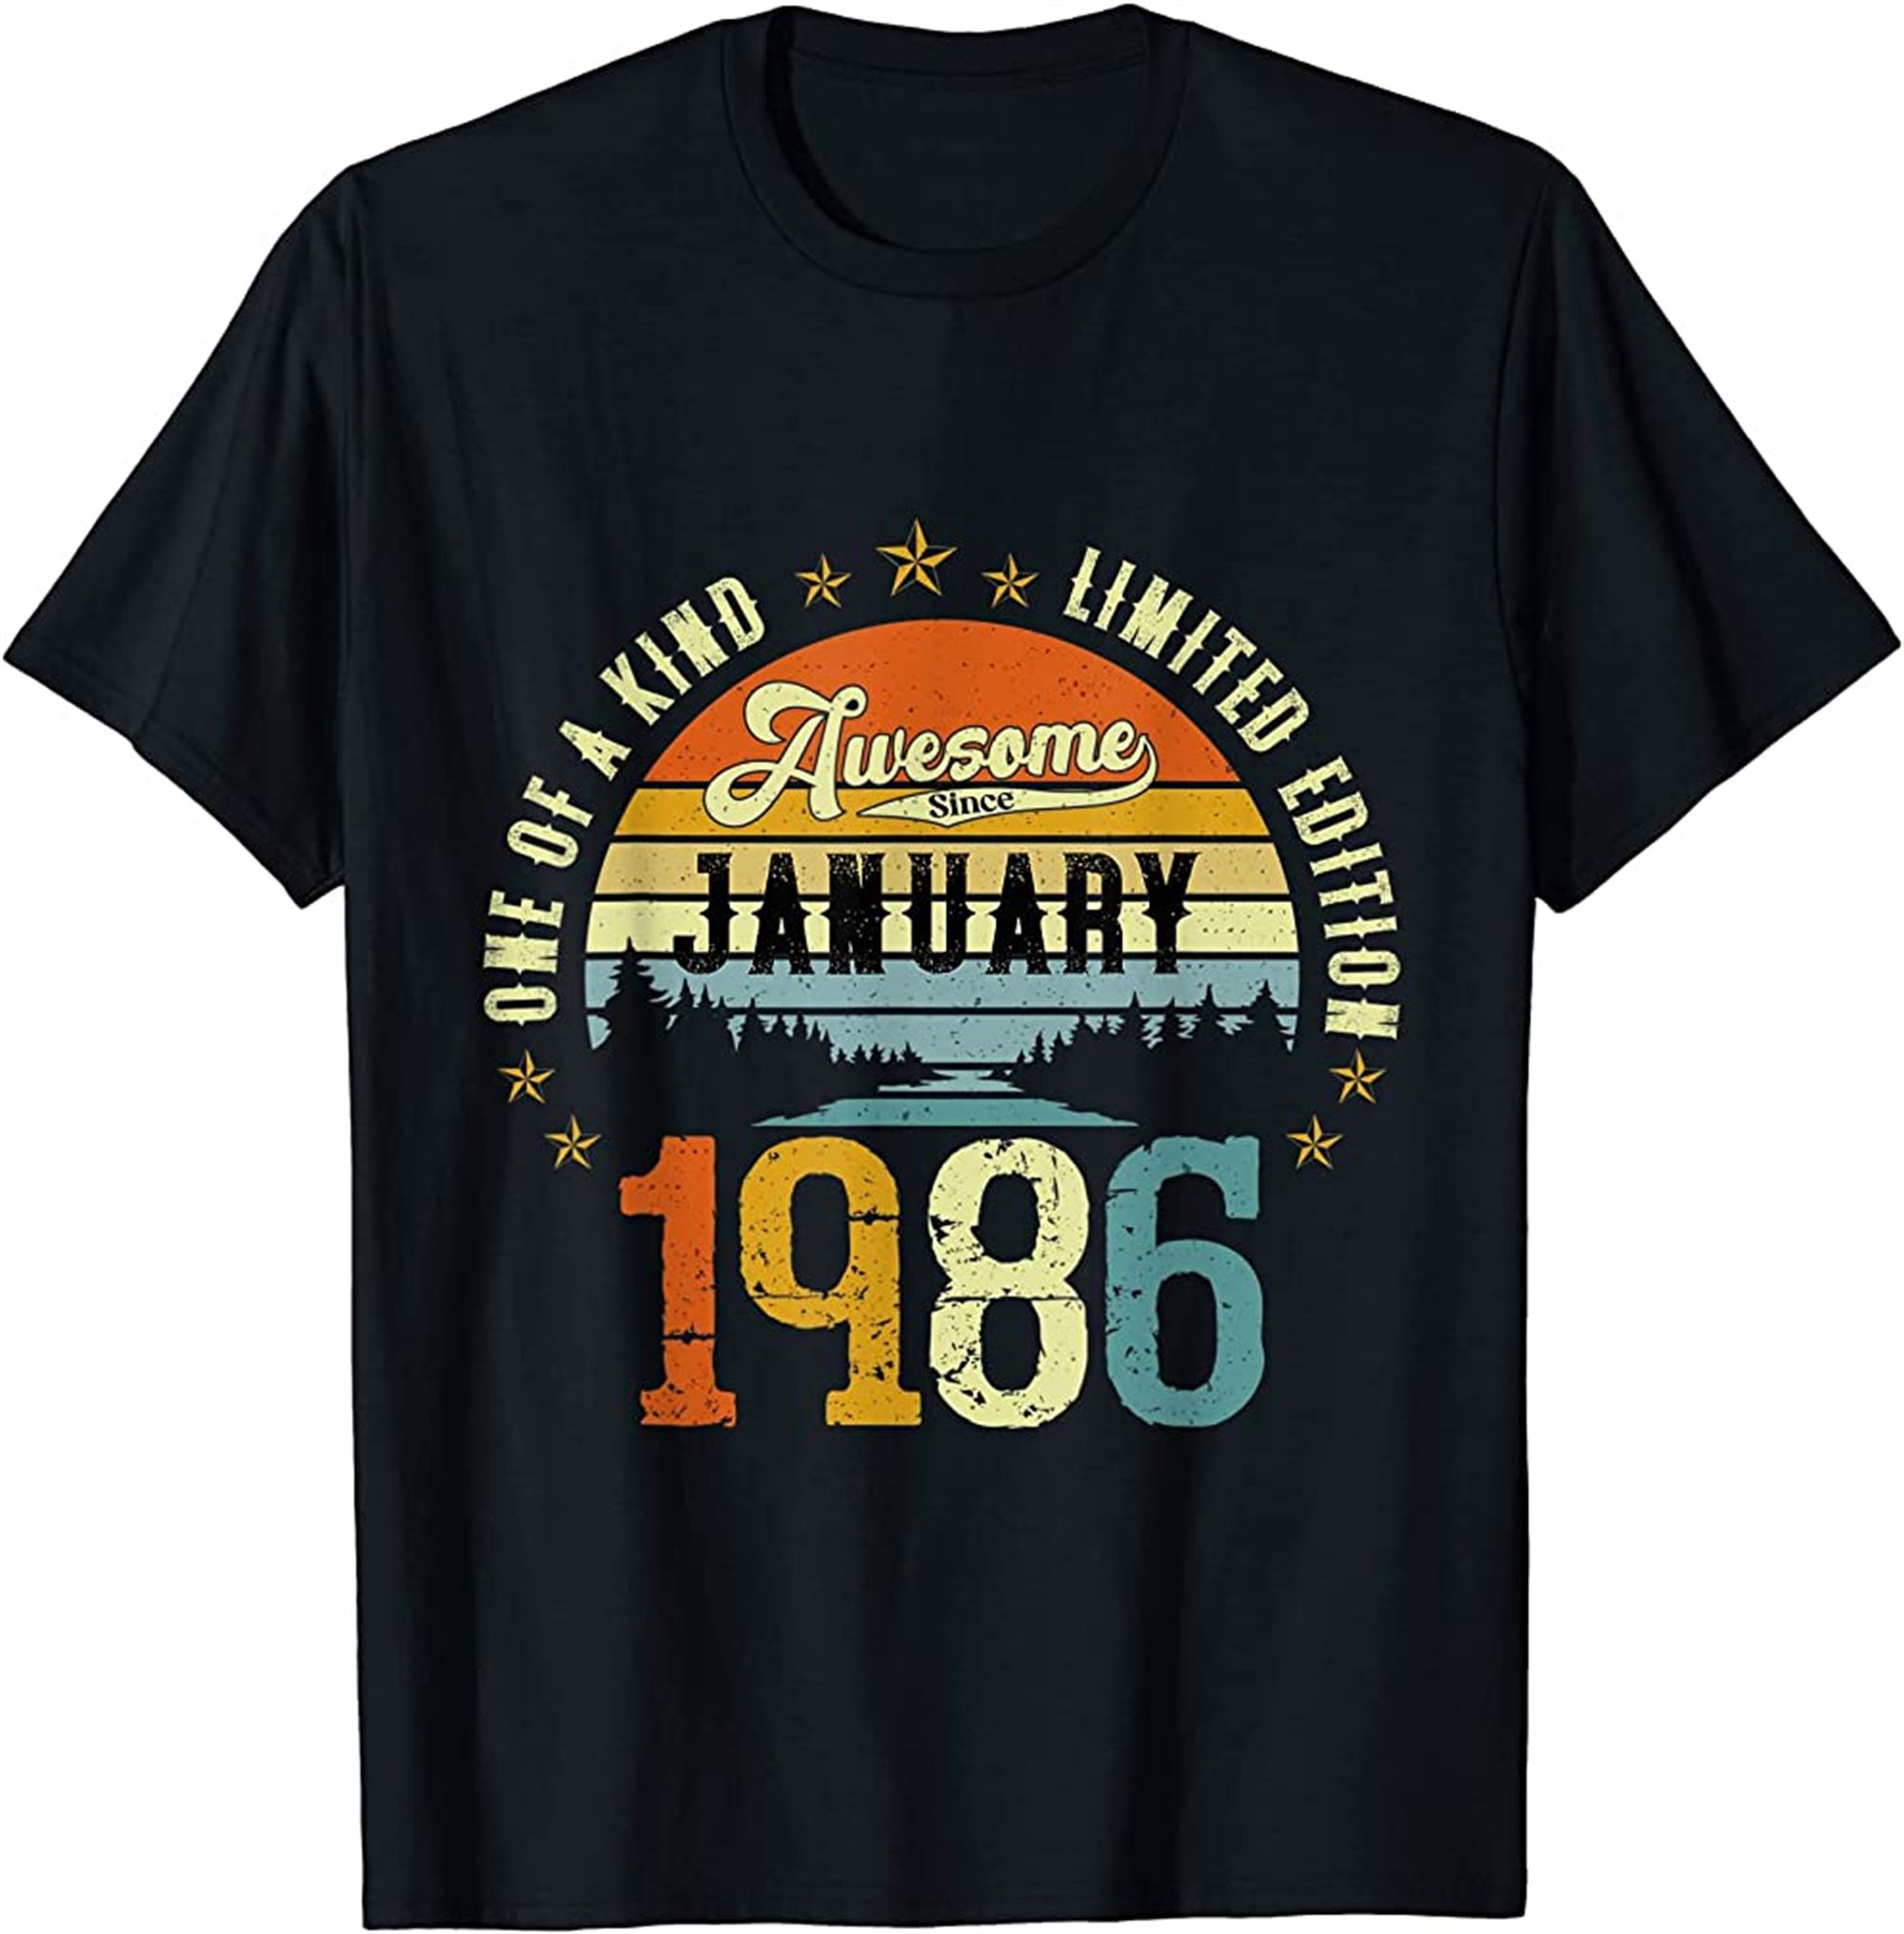 Awesome Since January 1986 Vintage 36th Birthday T-shirt Full Size Up To 5xl